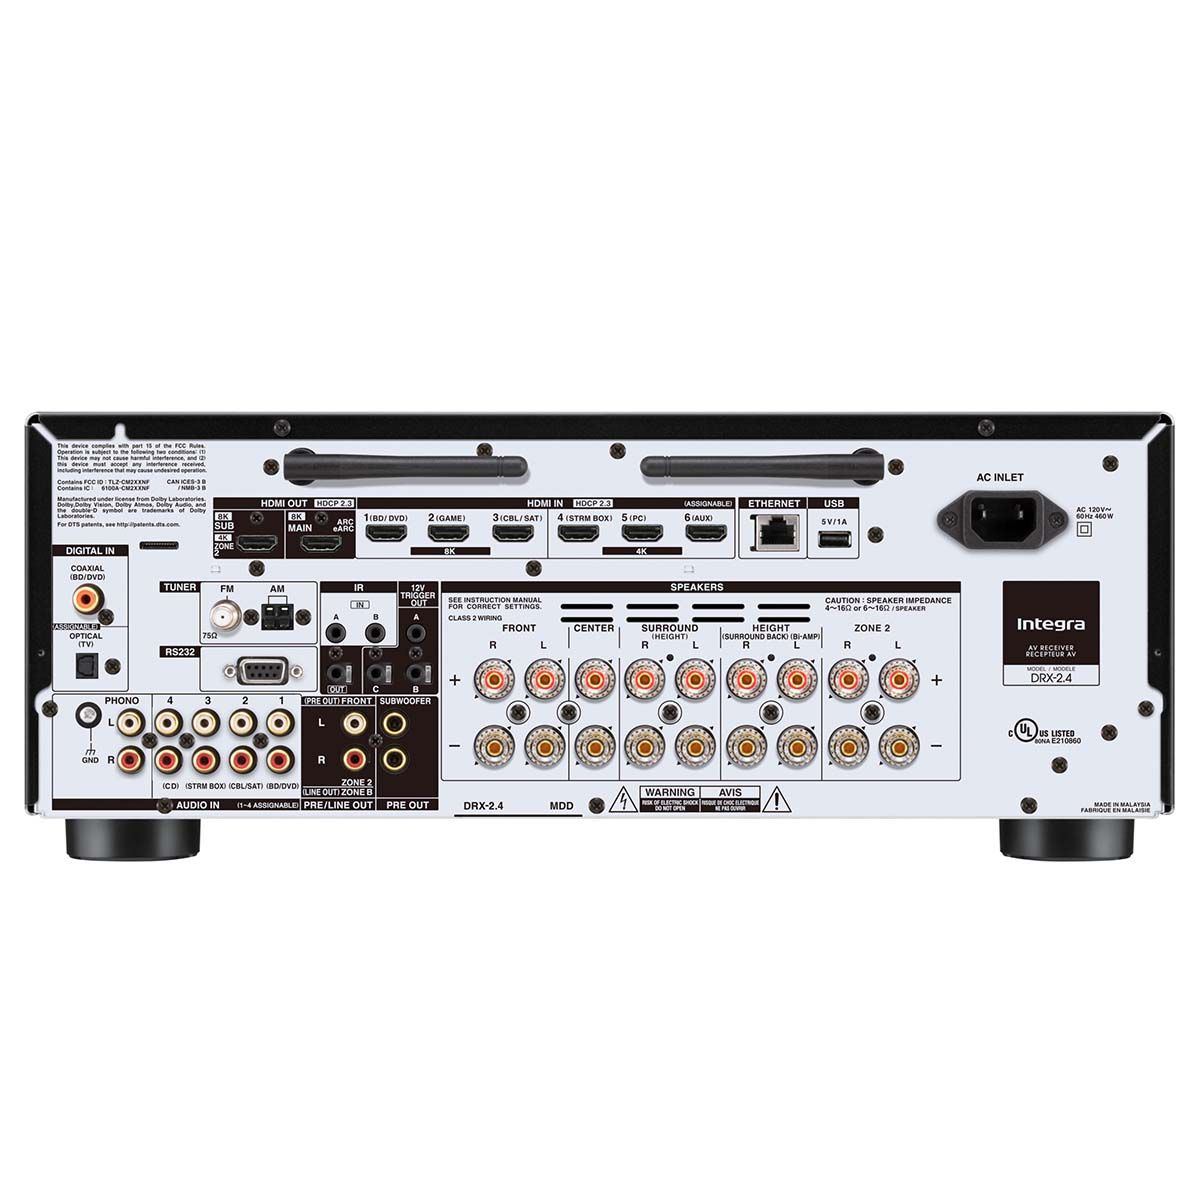 Integra DRX 2.4 Home Theater Receiver, rear panel view